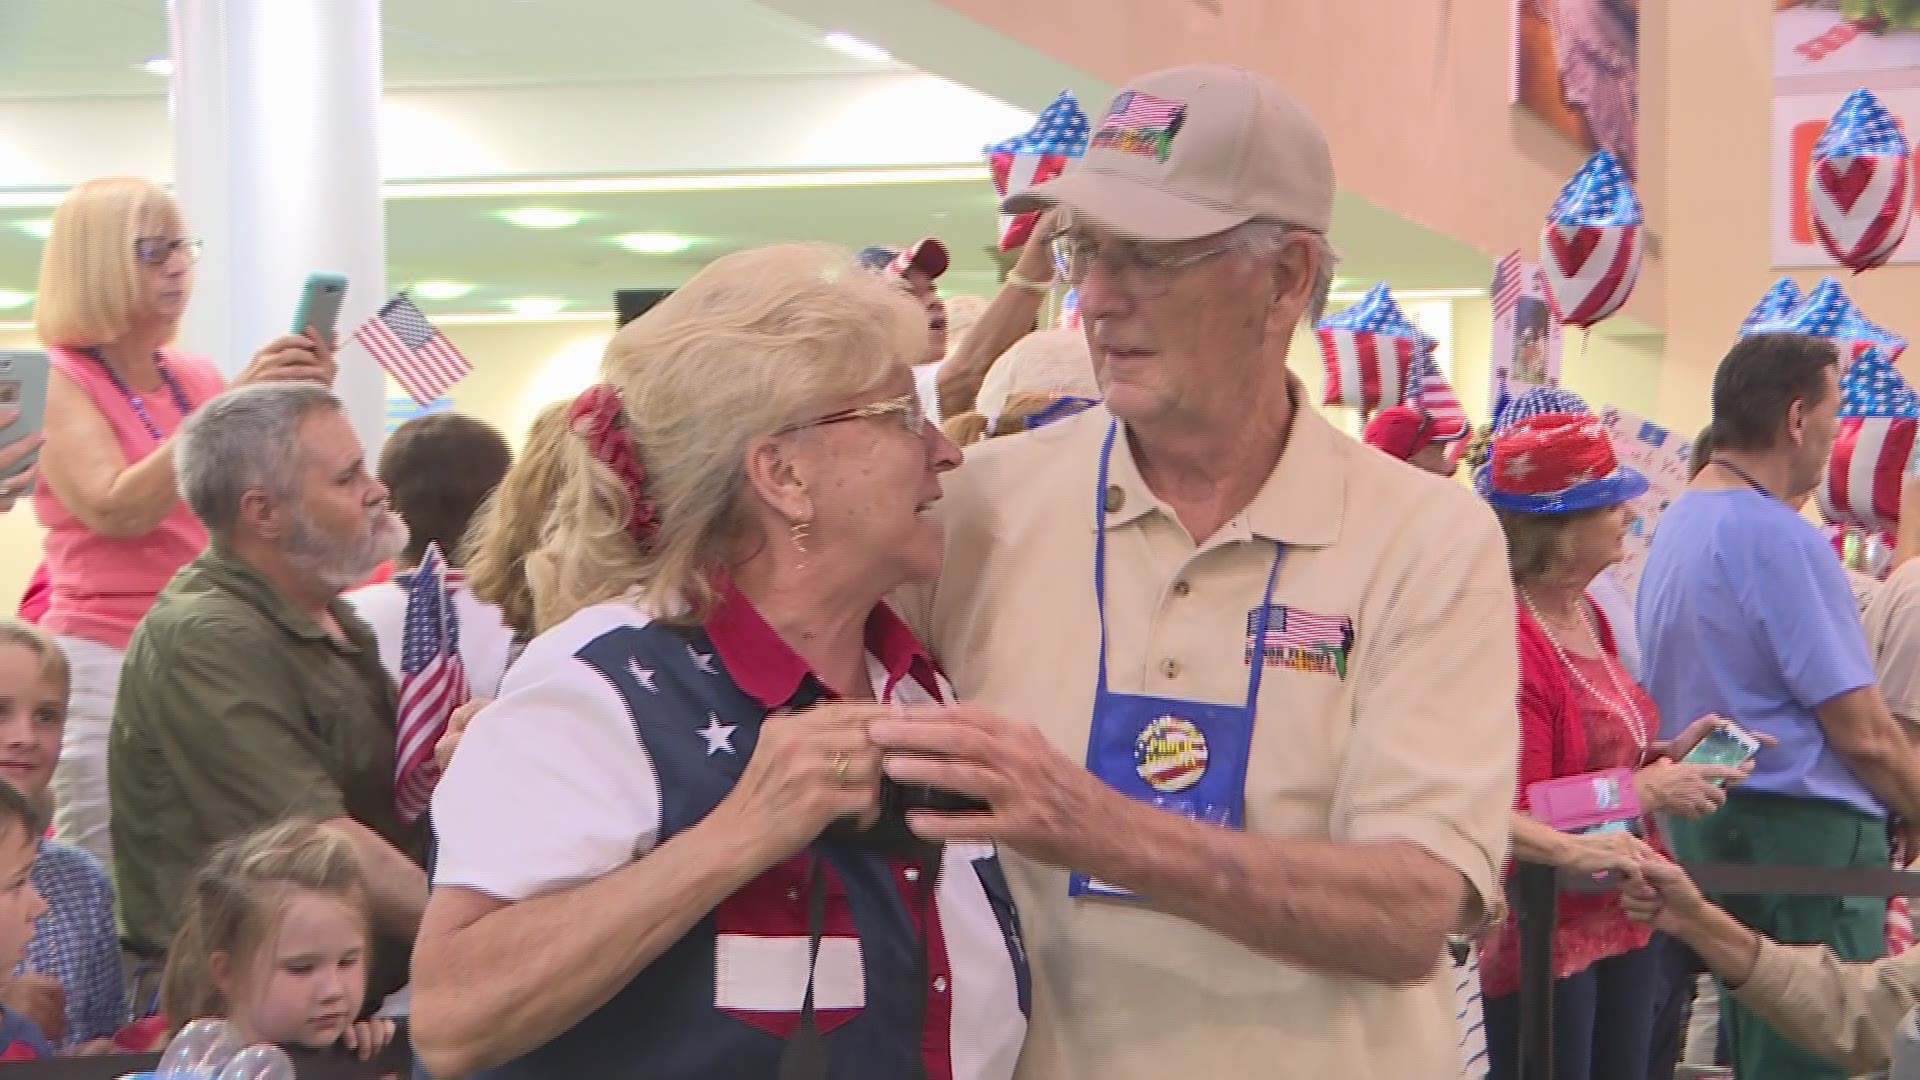 St. Pete-Clearwater International Airport had its 35th Honor Flight on Tuesday. It takes veterans to visit Washington, D.C. to visit the war memorials built in their honor. The next Honor Flight is scheduled for June 11.